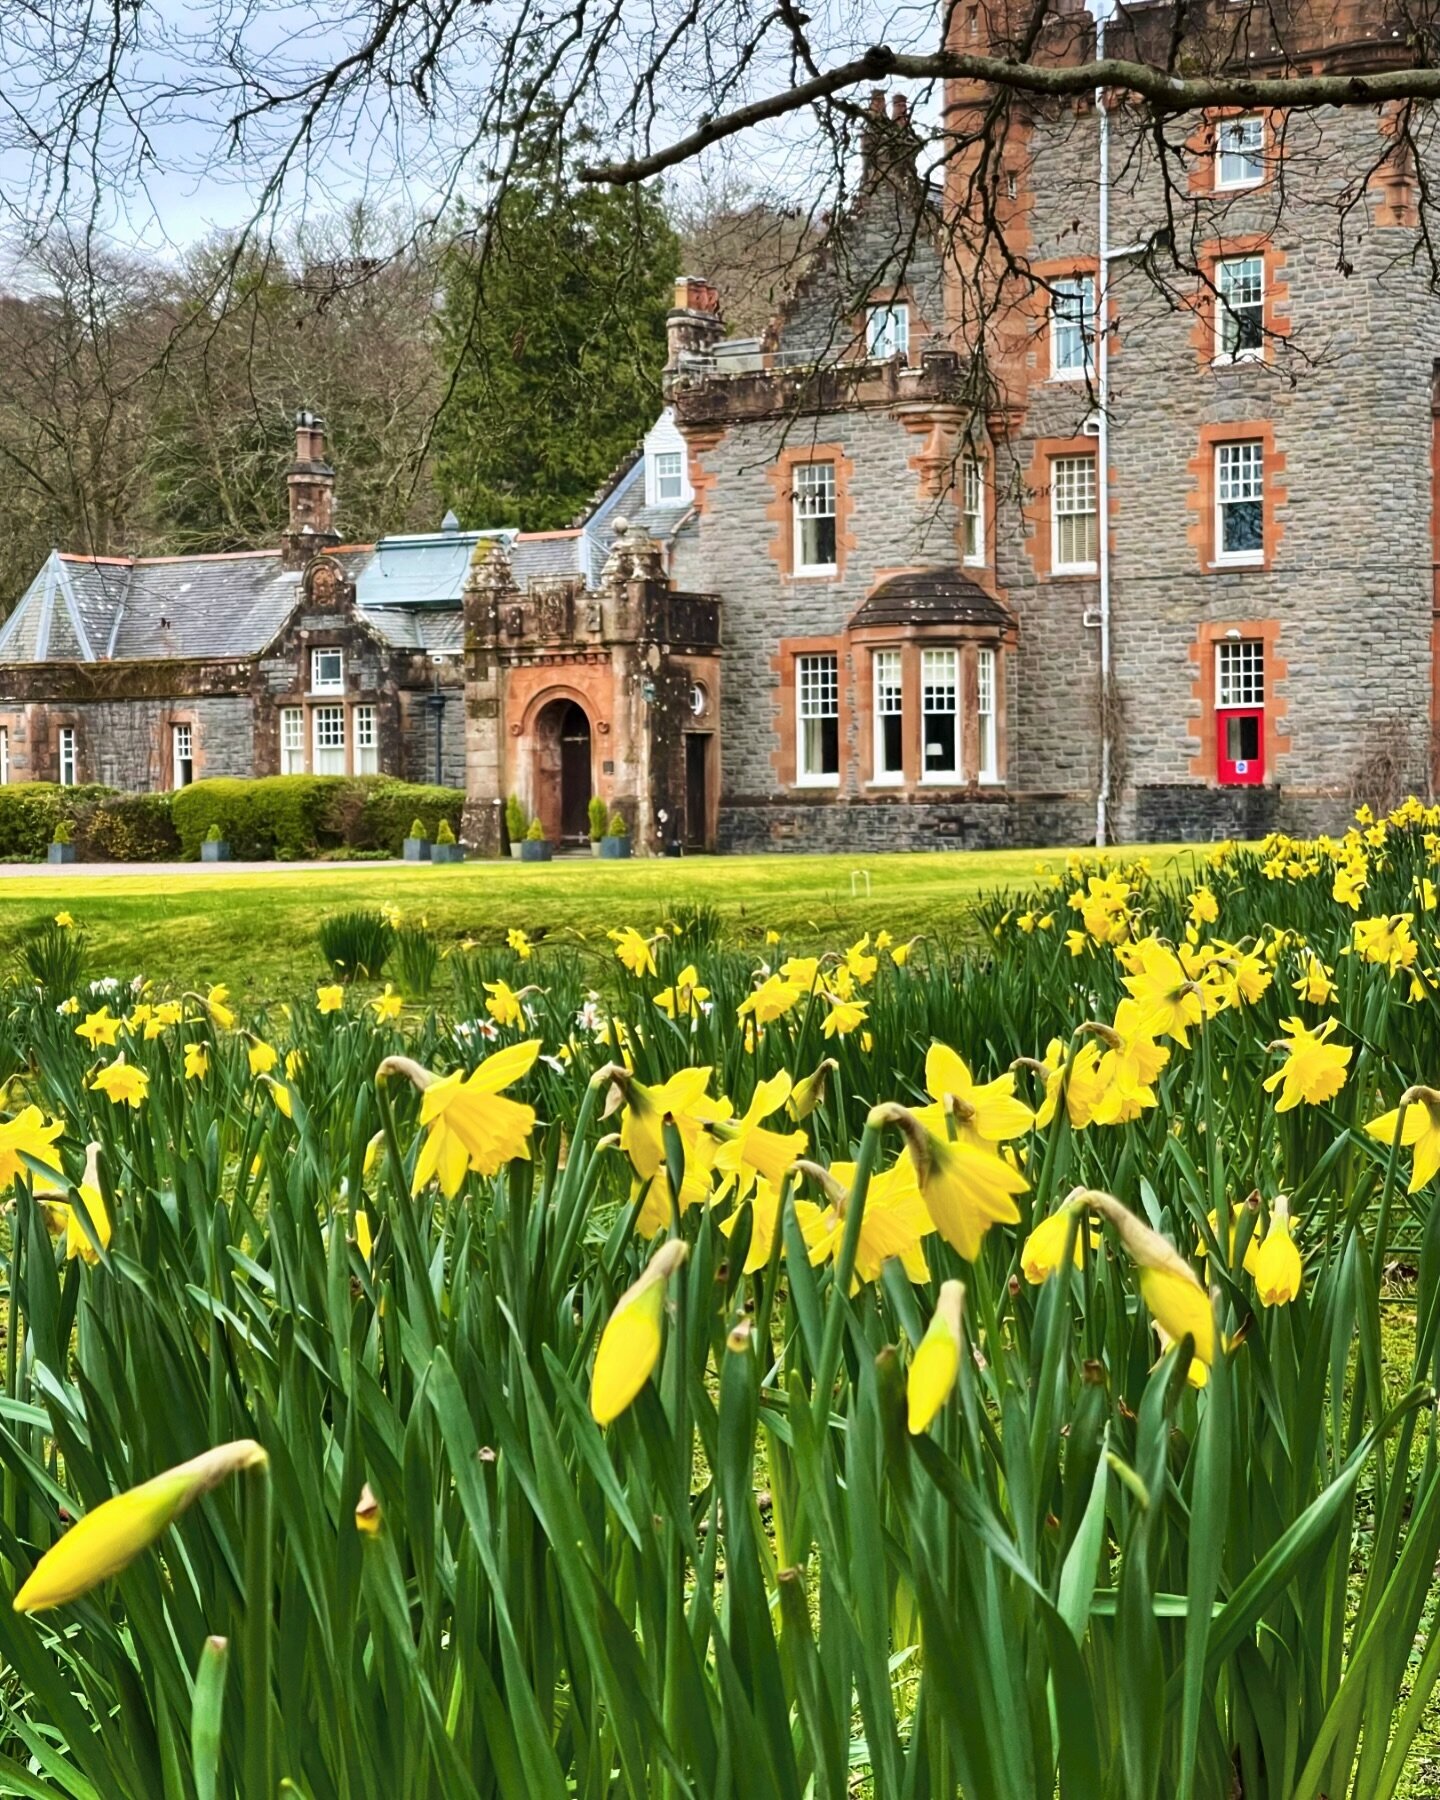 A little bit of spring in our step! Come and explore the awakening of our little island!!
#eriska #nature #spring #gardens #luxuryhotel